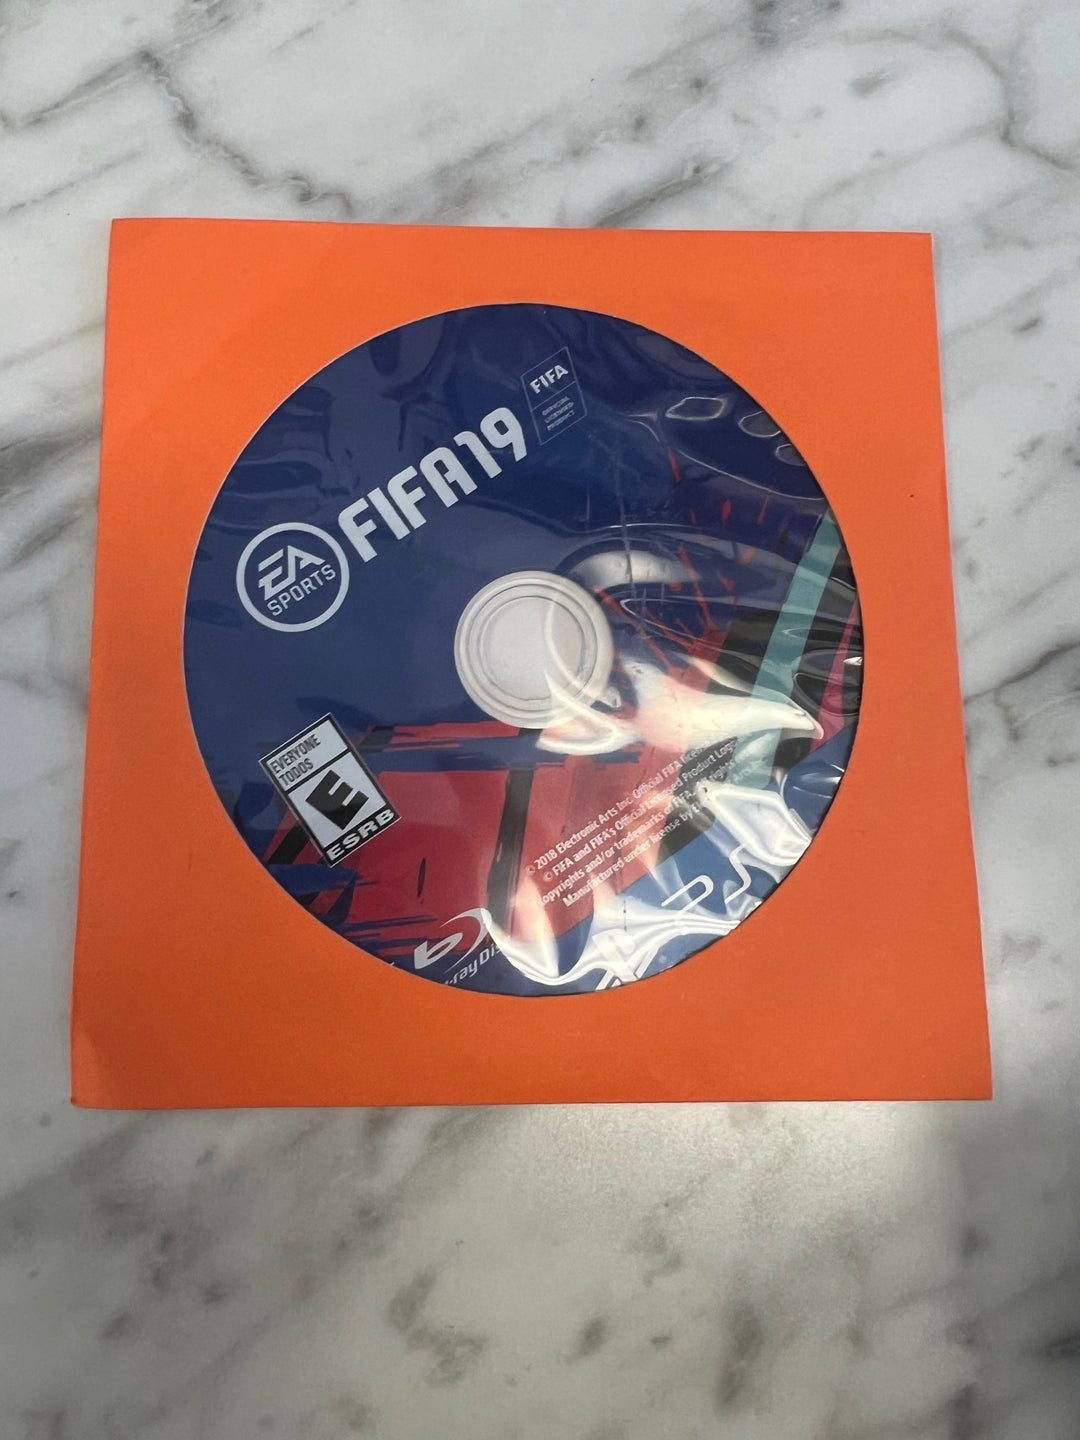 FIFA 19 for PS4 Playstation 4 Disc Only No Case/Manual DU62724